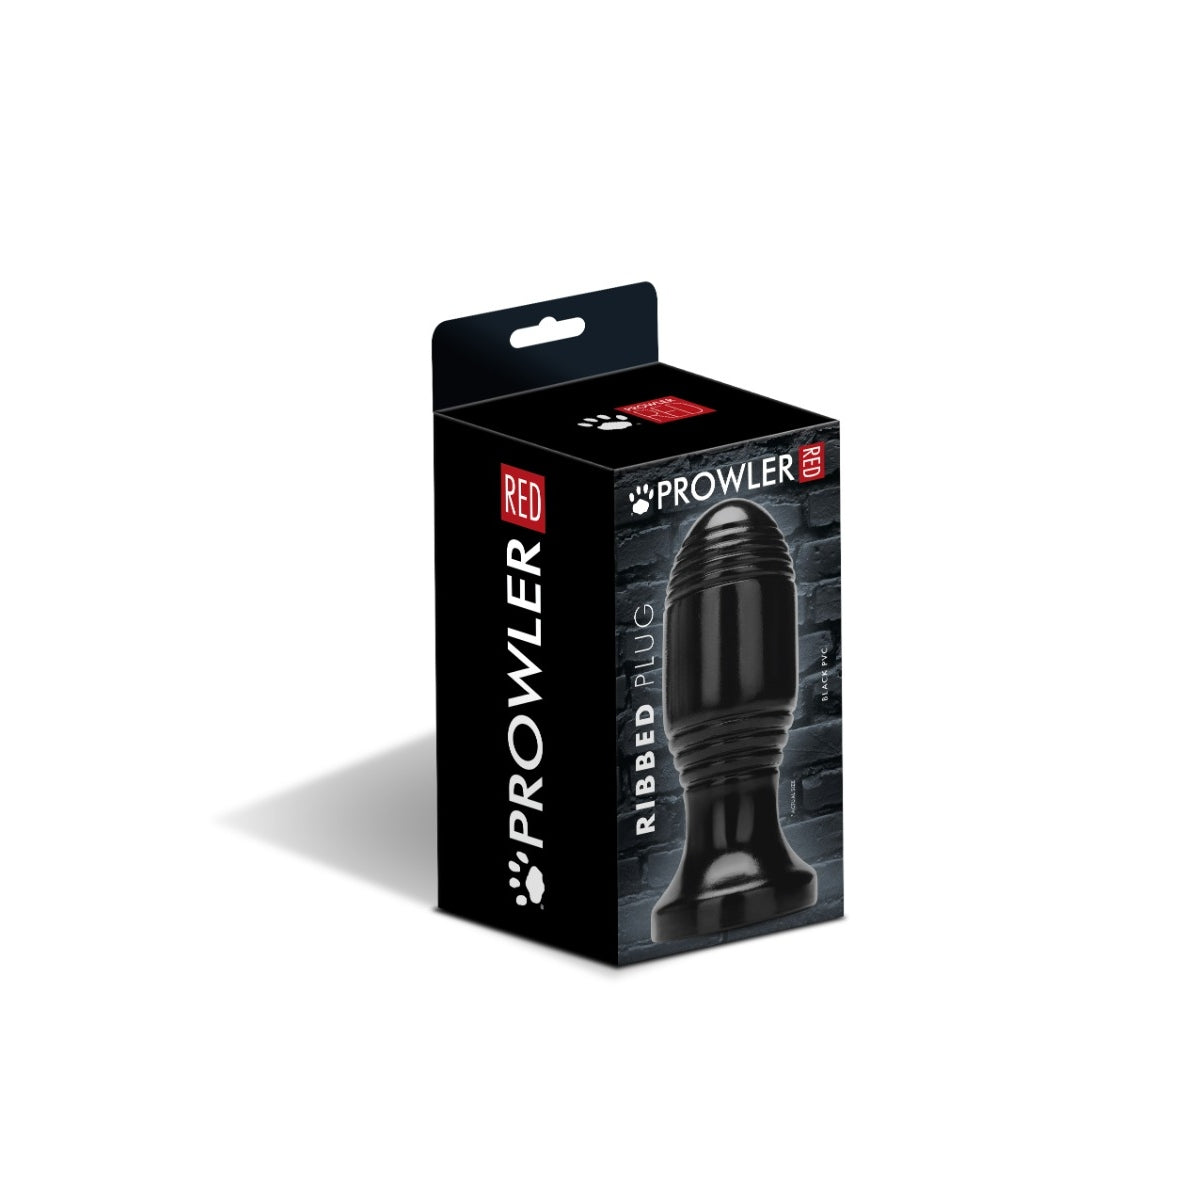 Prowler RED Ribbed Butt Plug Black (8236477382895)